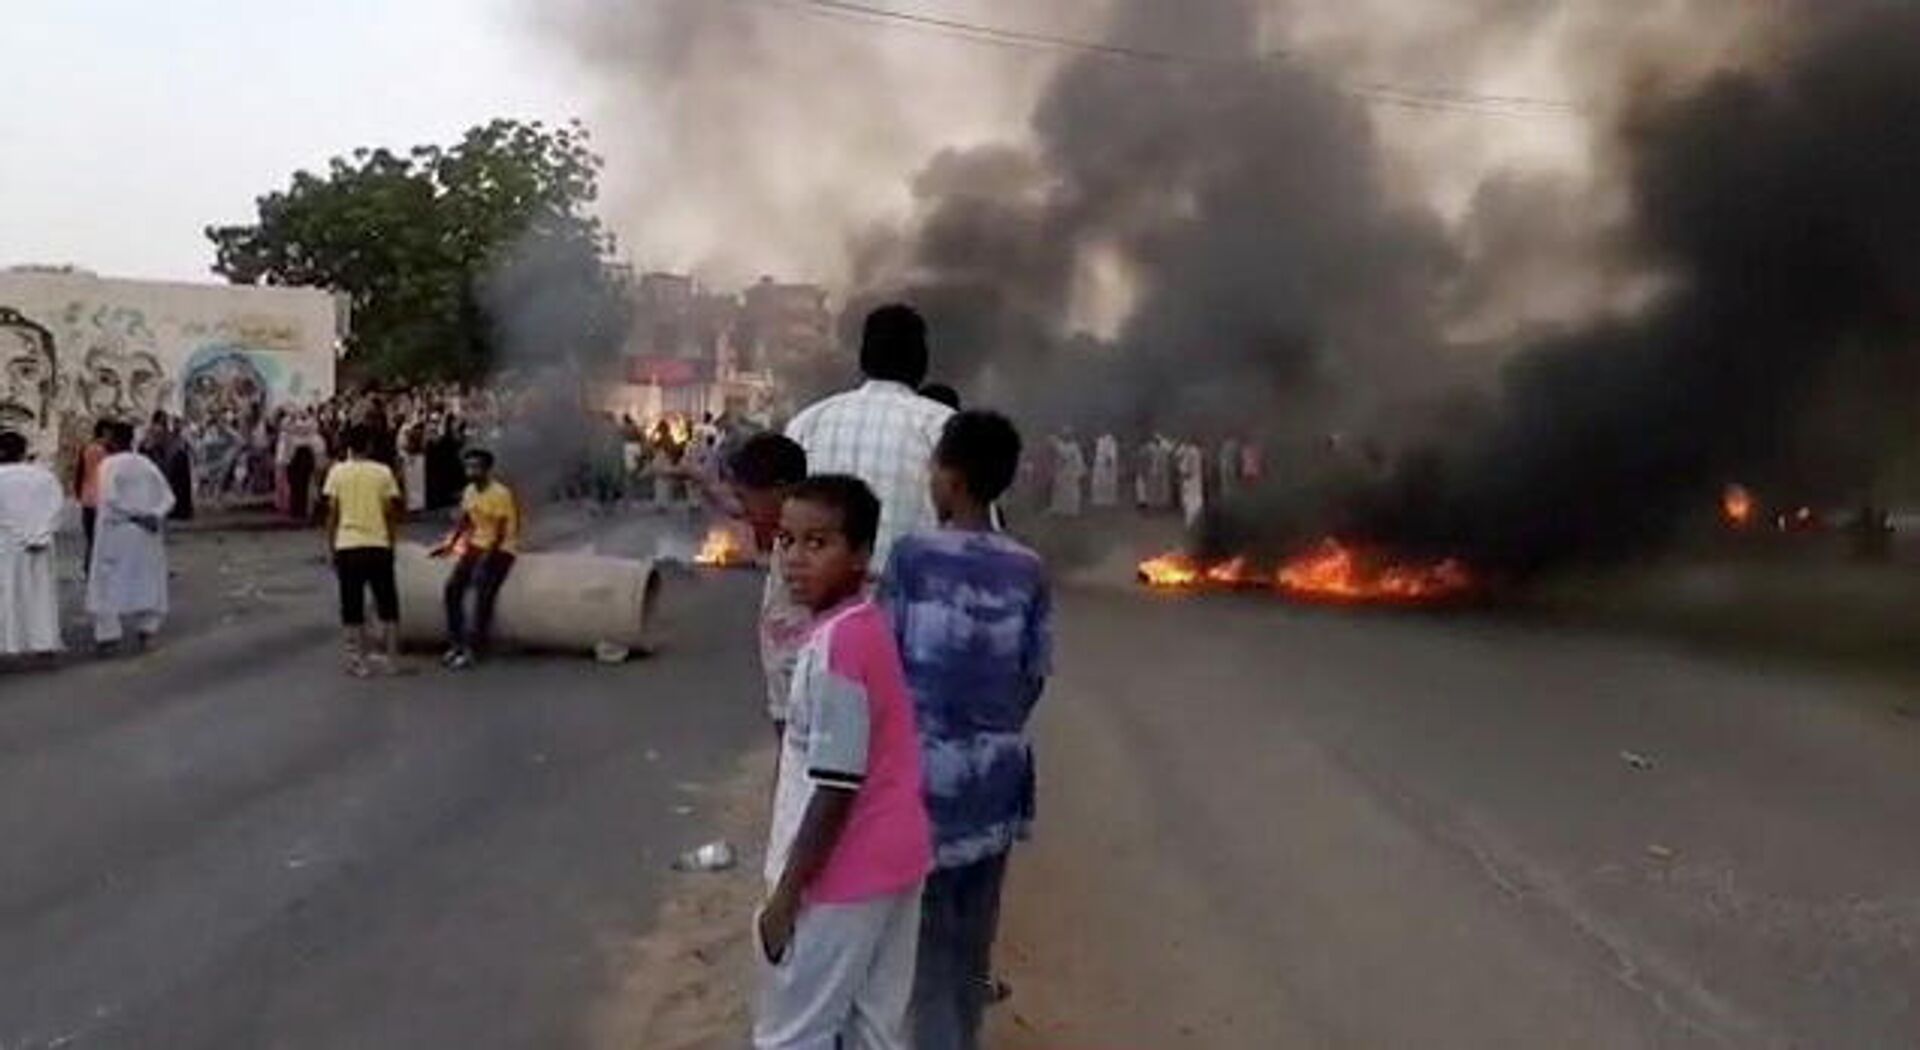 People gather around as smoke and fire are seen on the streets of Khartoum, Sudan, amid reports of a coup, 25 October 2021, in this still image from video obtained via social media. - Sputnik International, 1920, 03.11.2021